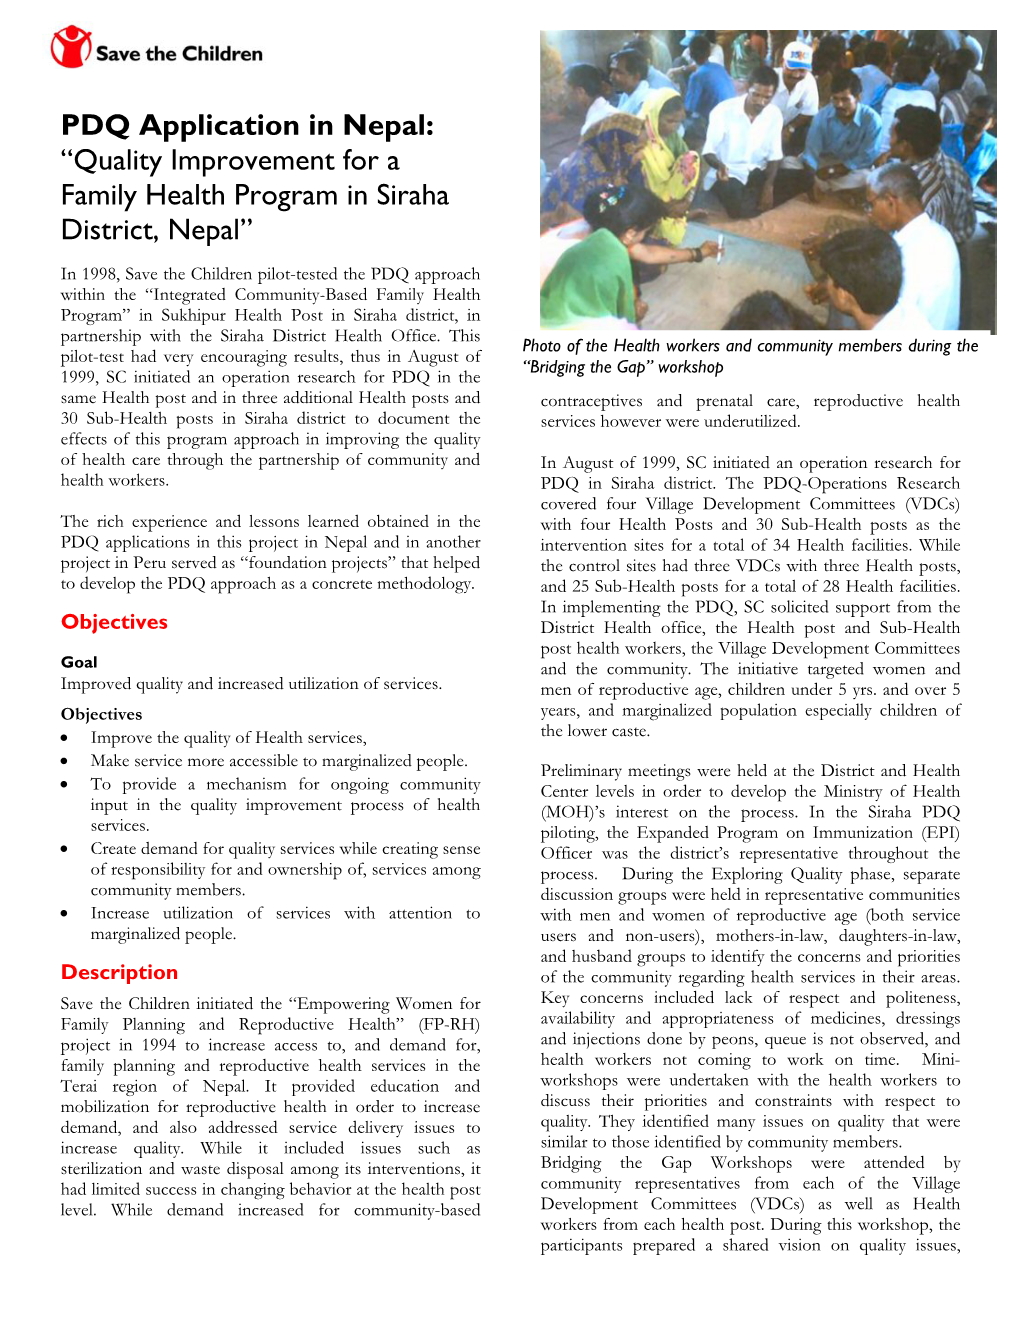 PDQ Application in Nepal: “Quality Improvement for a Family Health Program in Siraha District, Nepal”